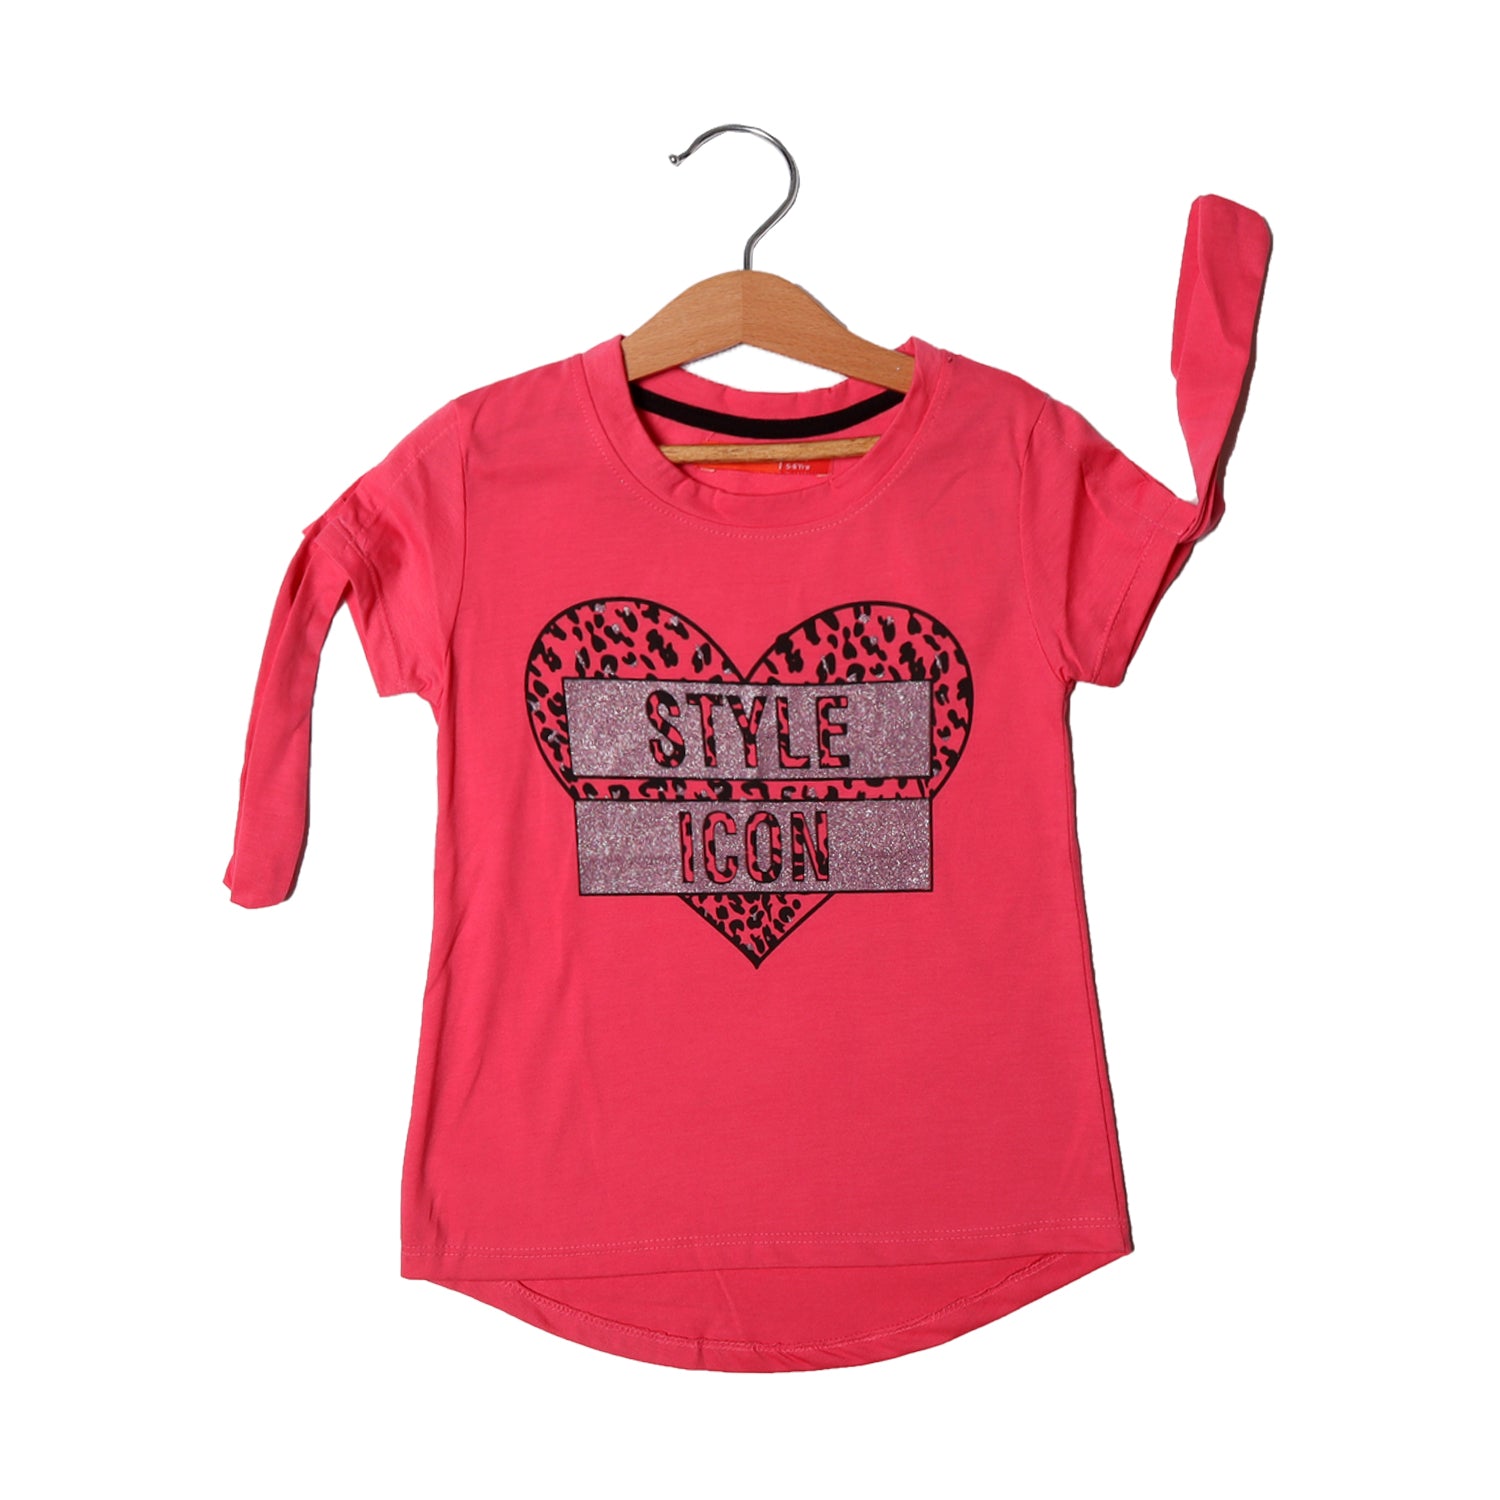 BLUSH PINK HEART STYLE ICON PRINTED T-SHIRT FOR GIRLS